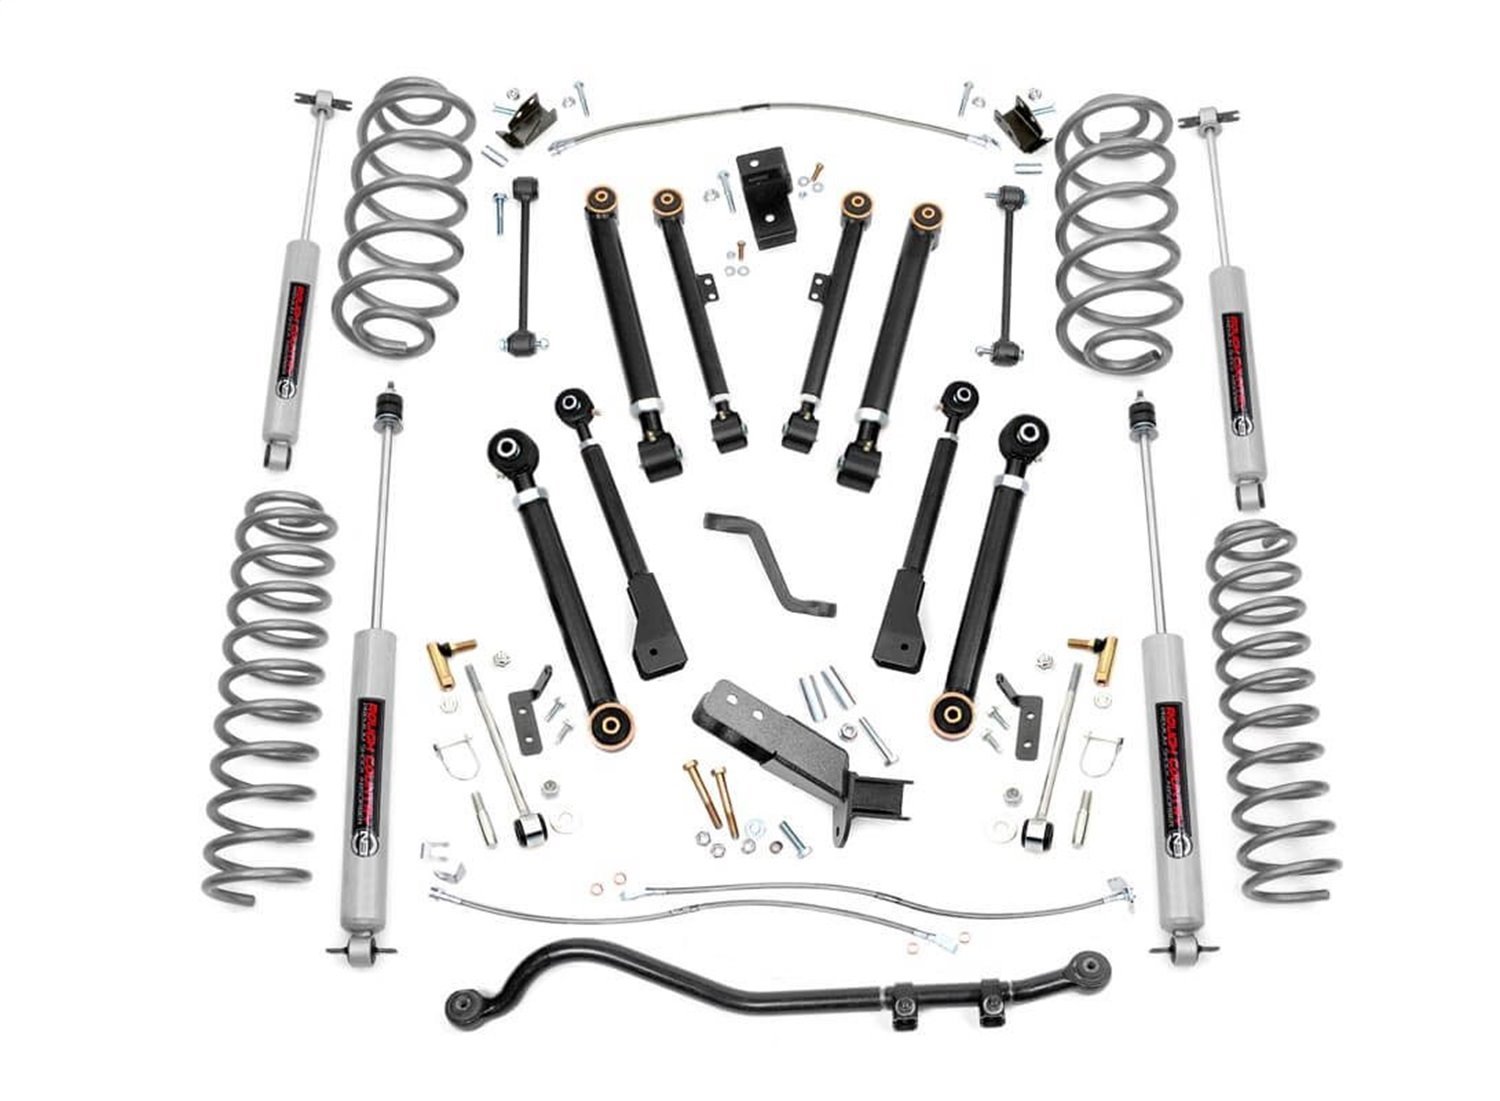 66130 4-inch X-Series Suspension Lift System